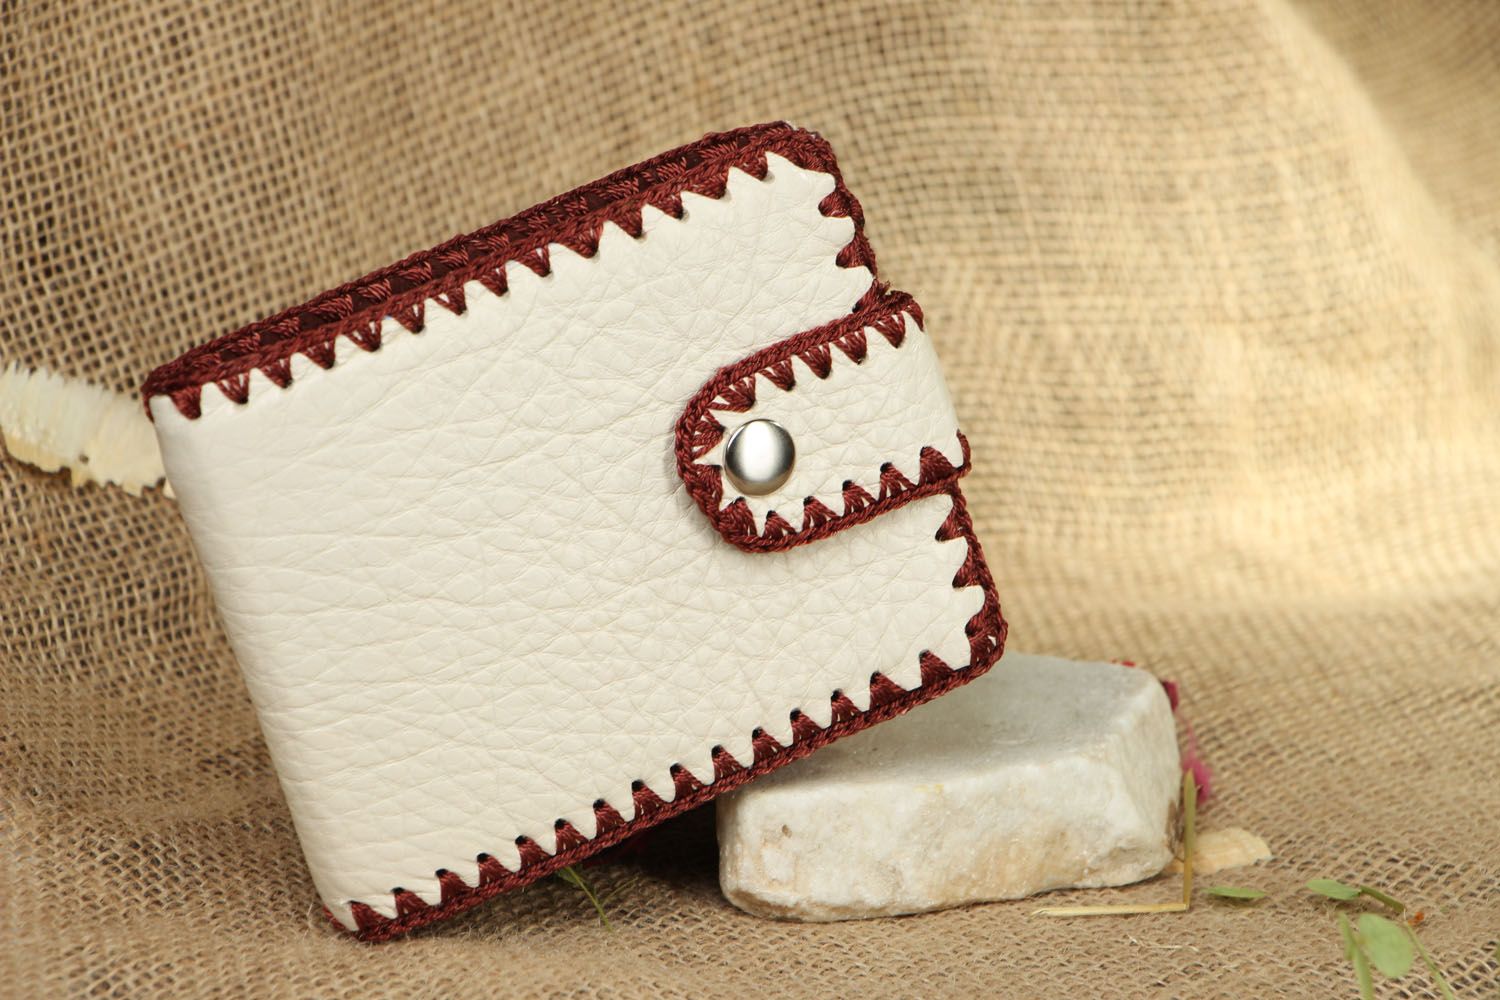 Leather wallet photo 5